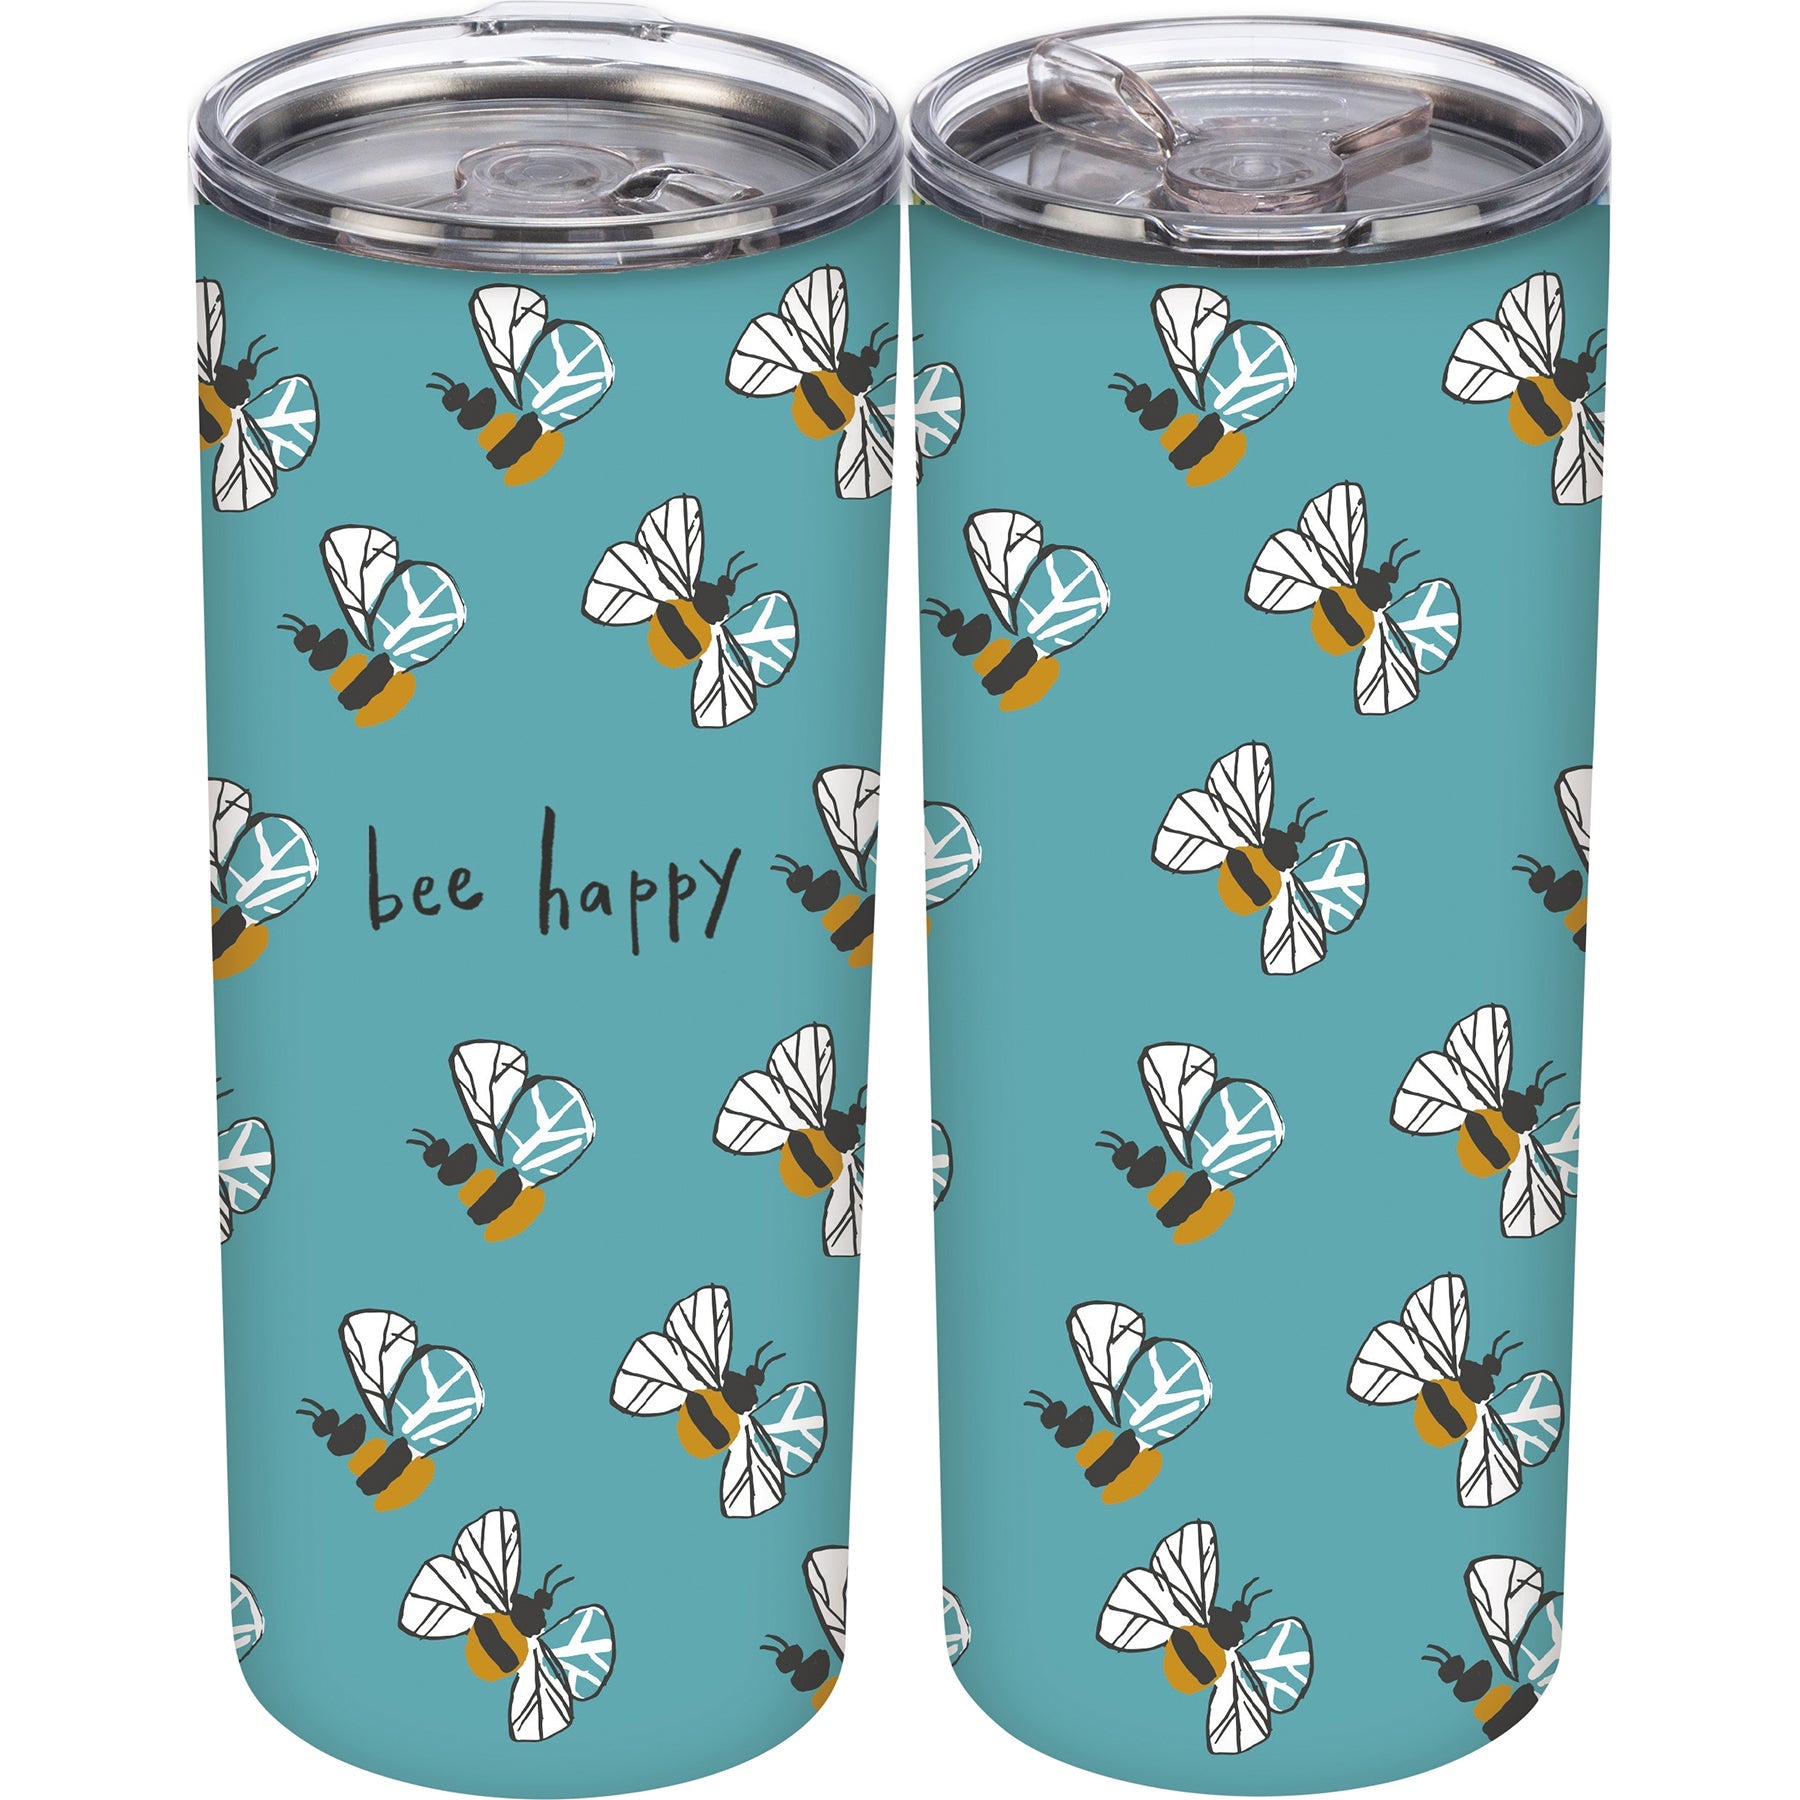 Bee Happy Coffee Tumbler and Socks Gift Set - The Kindness Cause Gift Shop